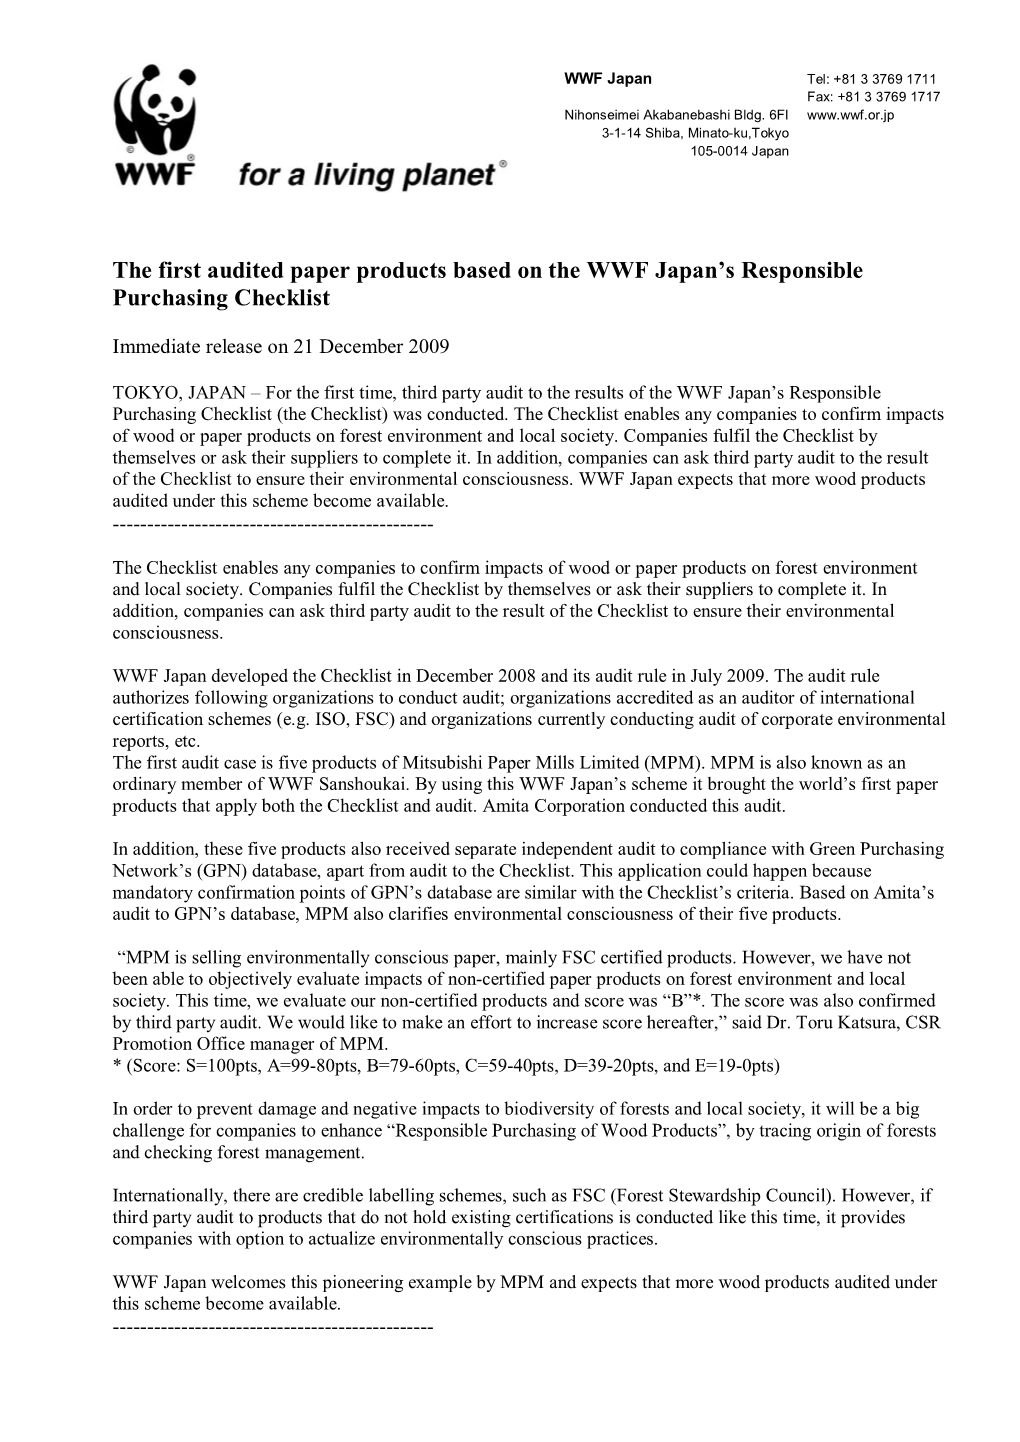 The First Audited Paper Products Based on the WWF Japan's Responsible